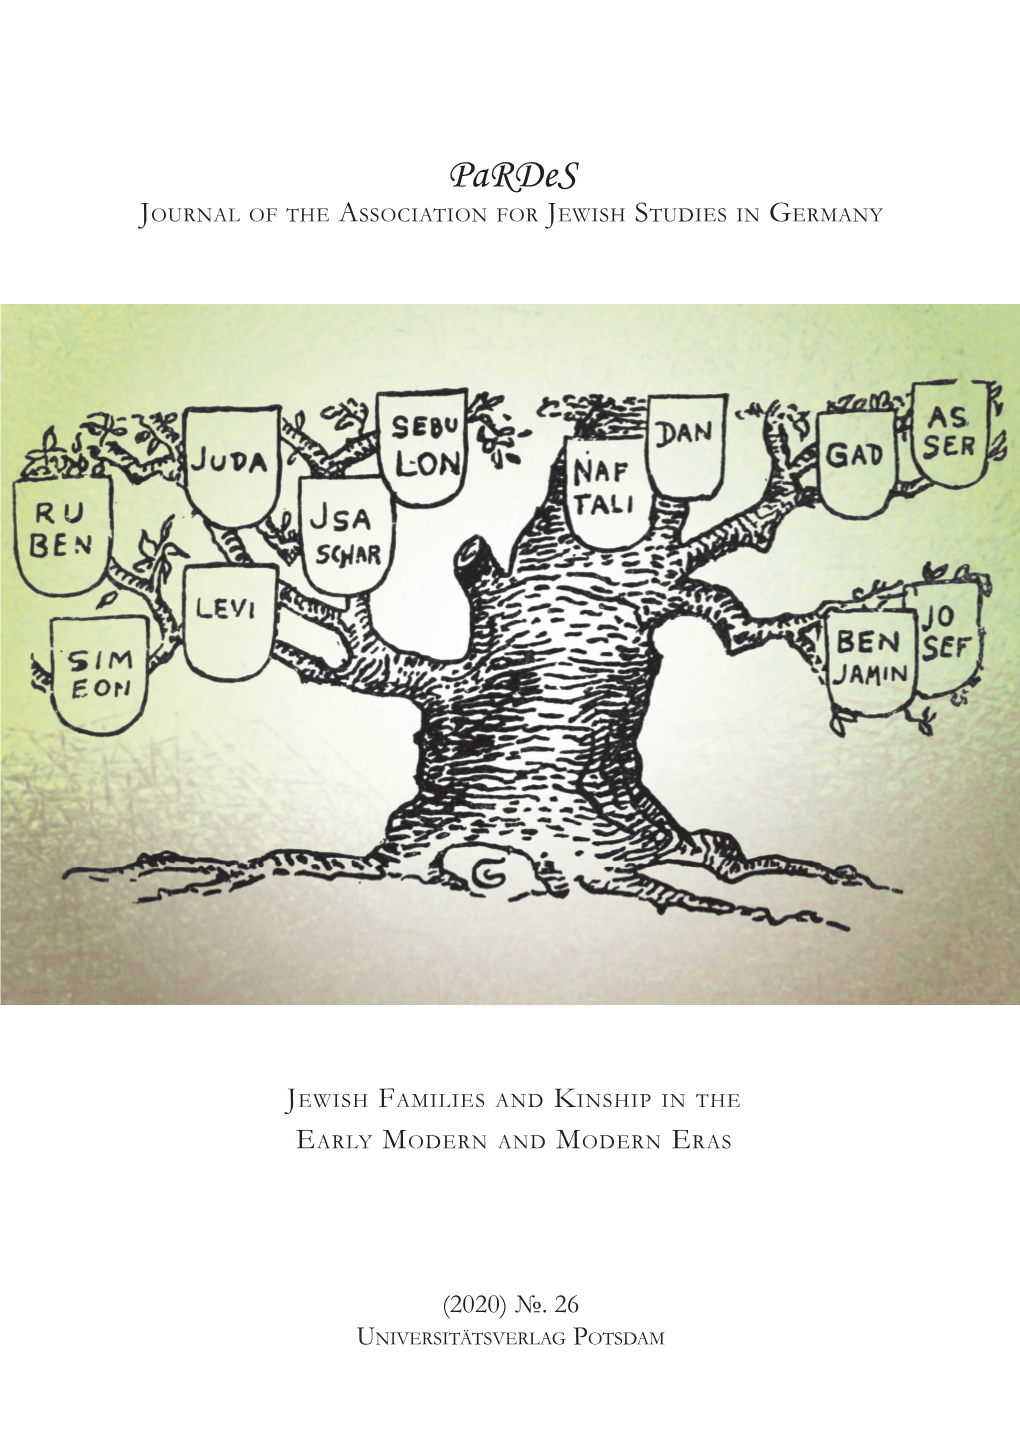 Pardes JOURNAL of the ASSOCIATION for JEWISH STUDIES in GERMANY